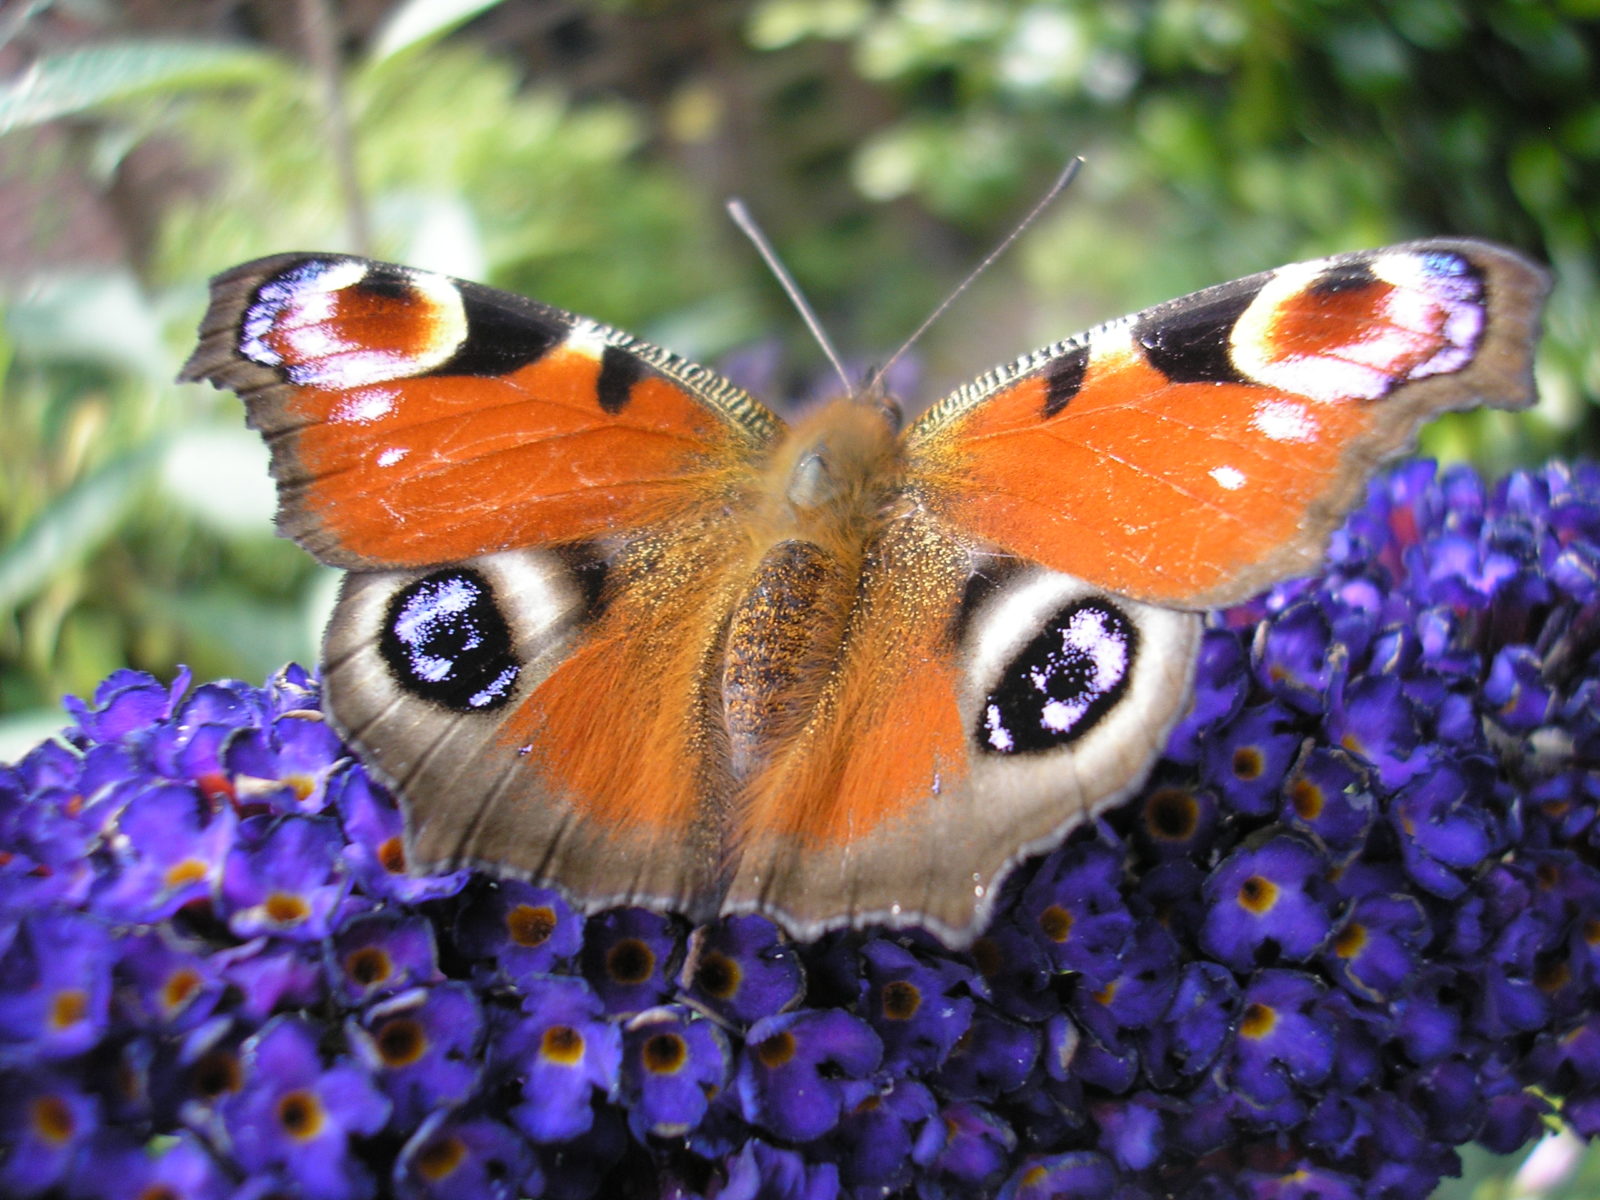 Peacock butterfly on Buddleia